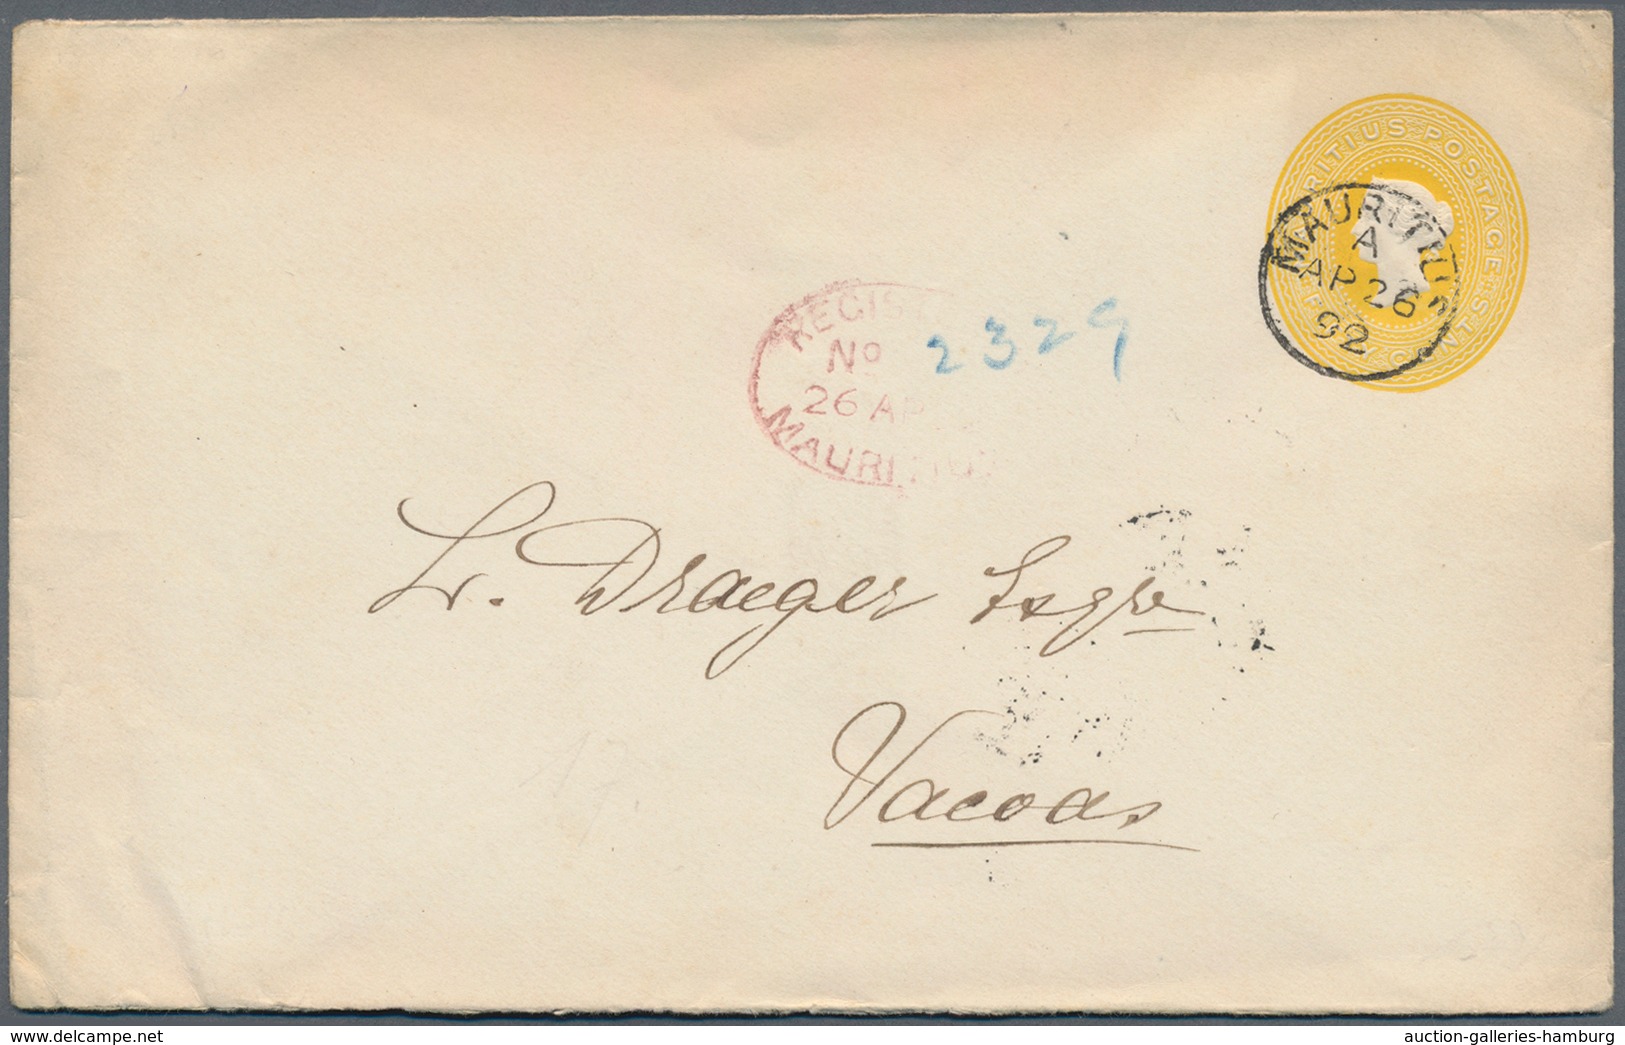 Mauritius: 1892. 50c Yellow Postal Stationery Envelope, Cancelled Mauritius A AP 26 92 And Oval Regi - Maurice (...-1967)